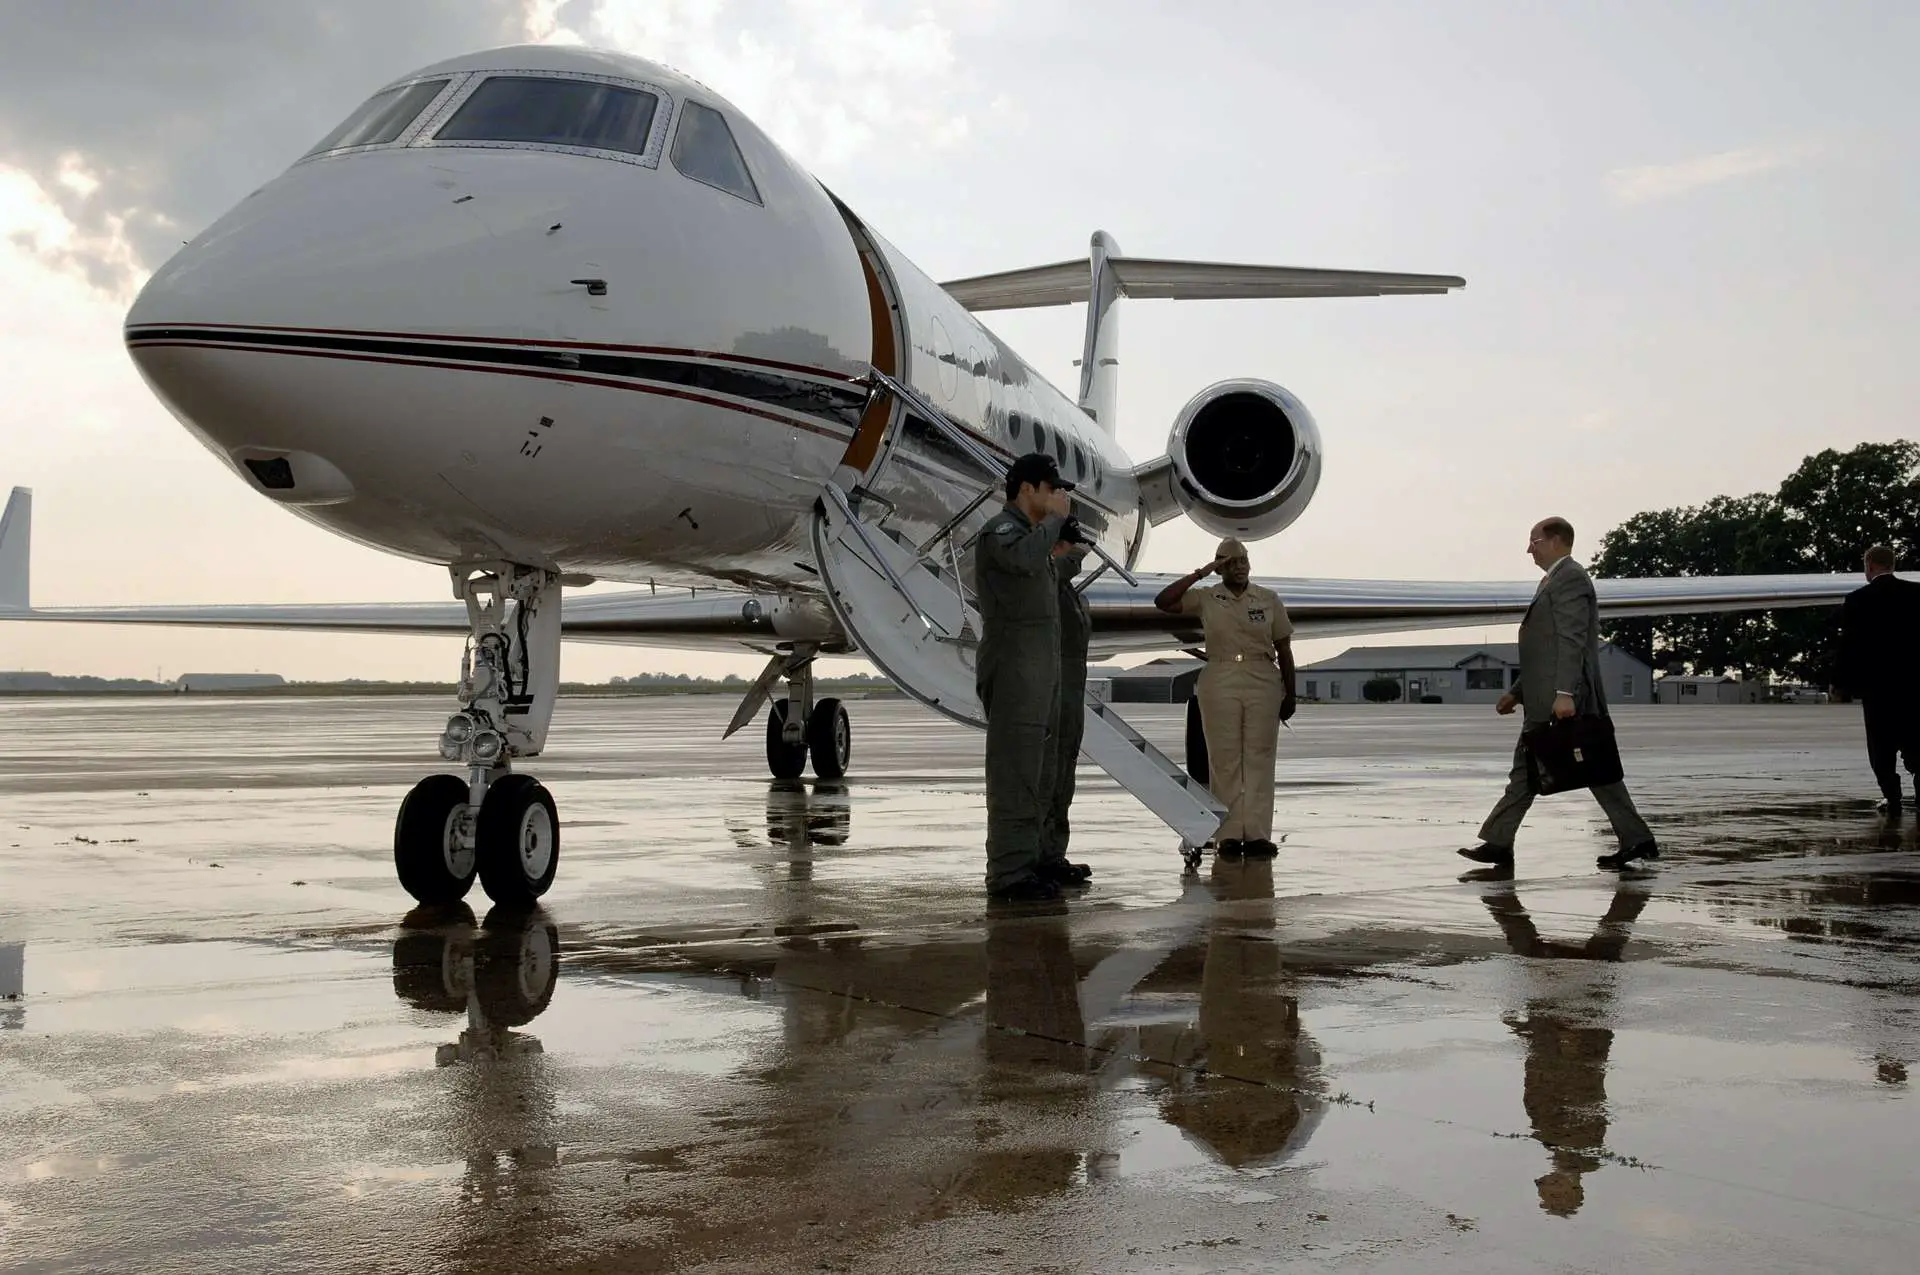 Business Aircraft | Travel Tips | Private Jets - What I'D Like To Say If I Ever Set Foot On One! | Travel Tips | Author: Anthony Bianco - The Travel Tart Blog